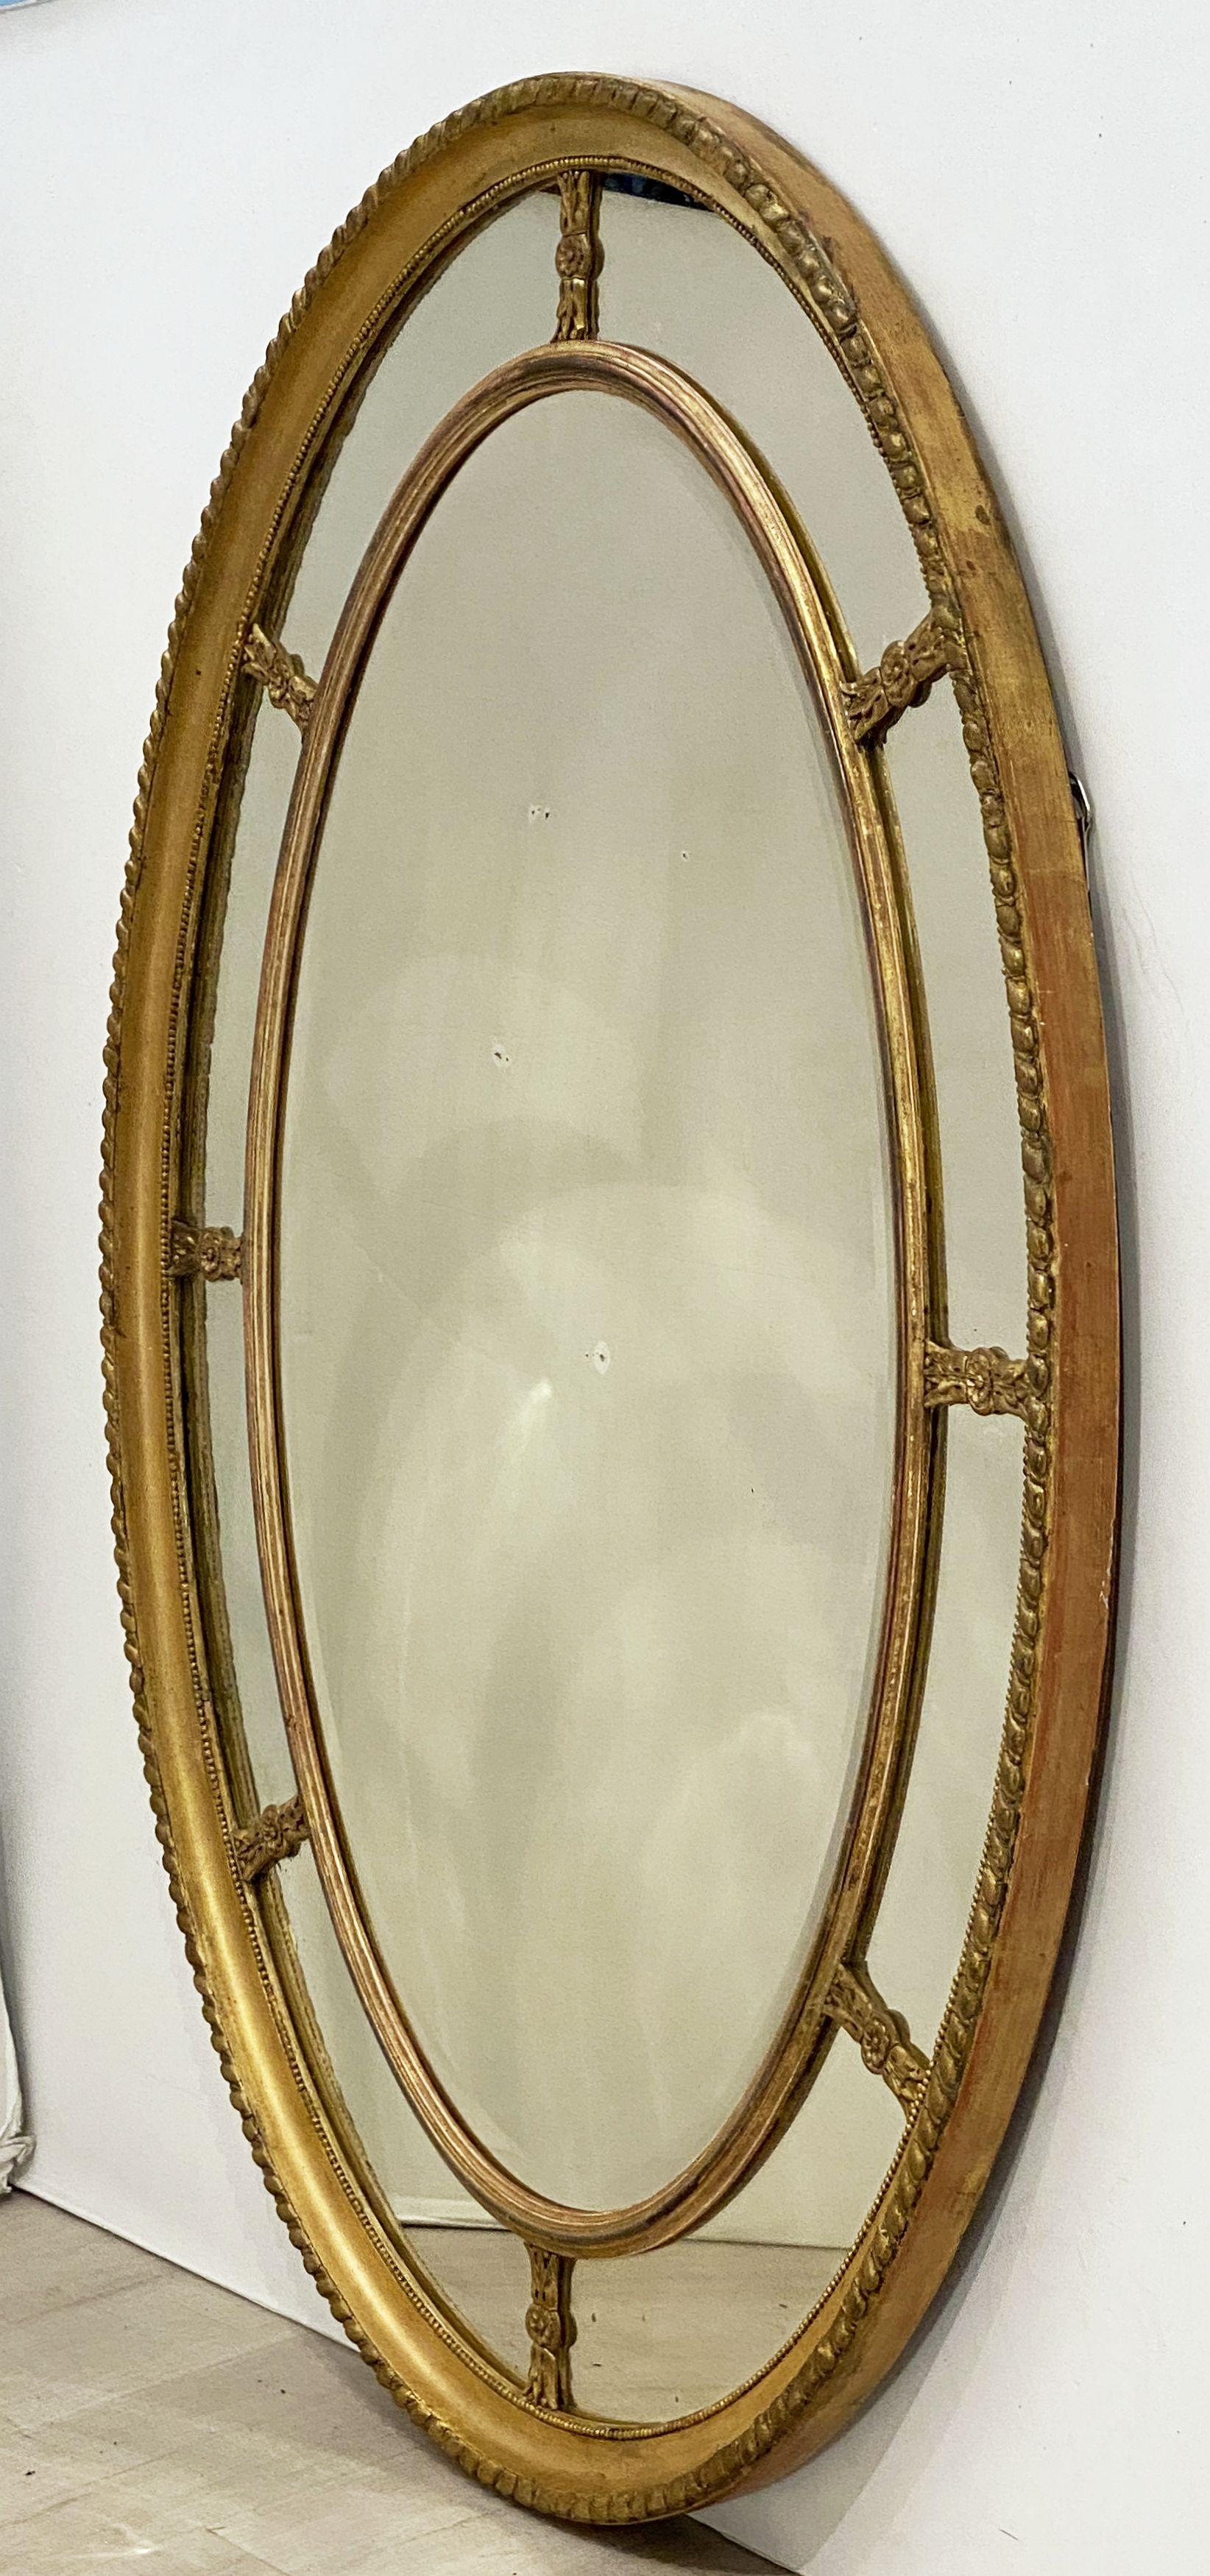 3 oval mirror